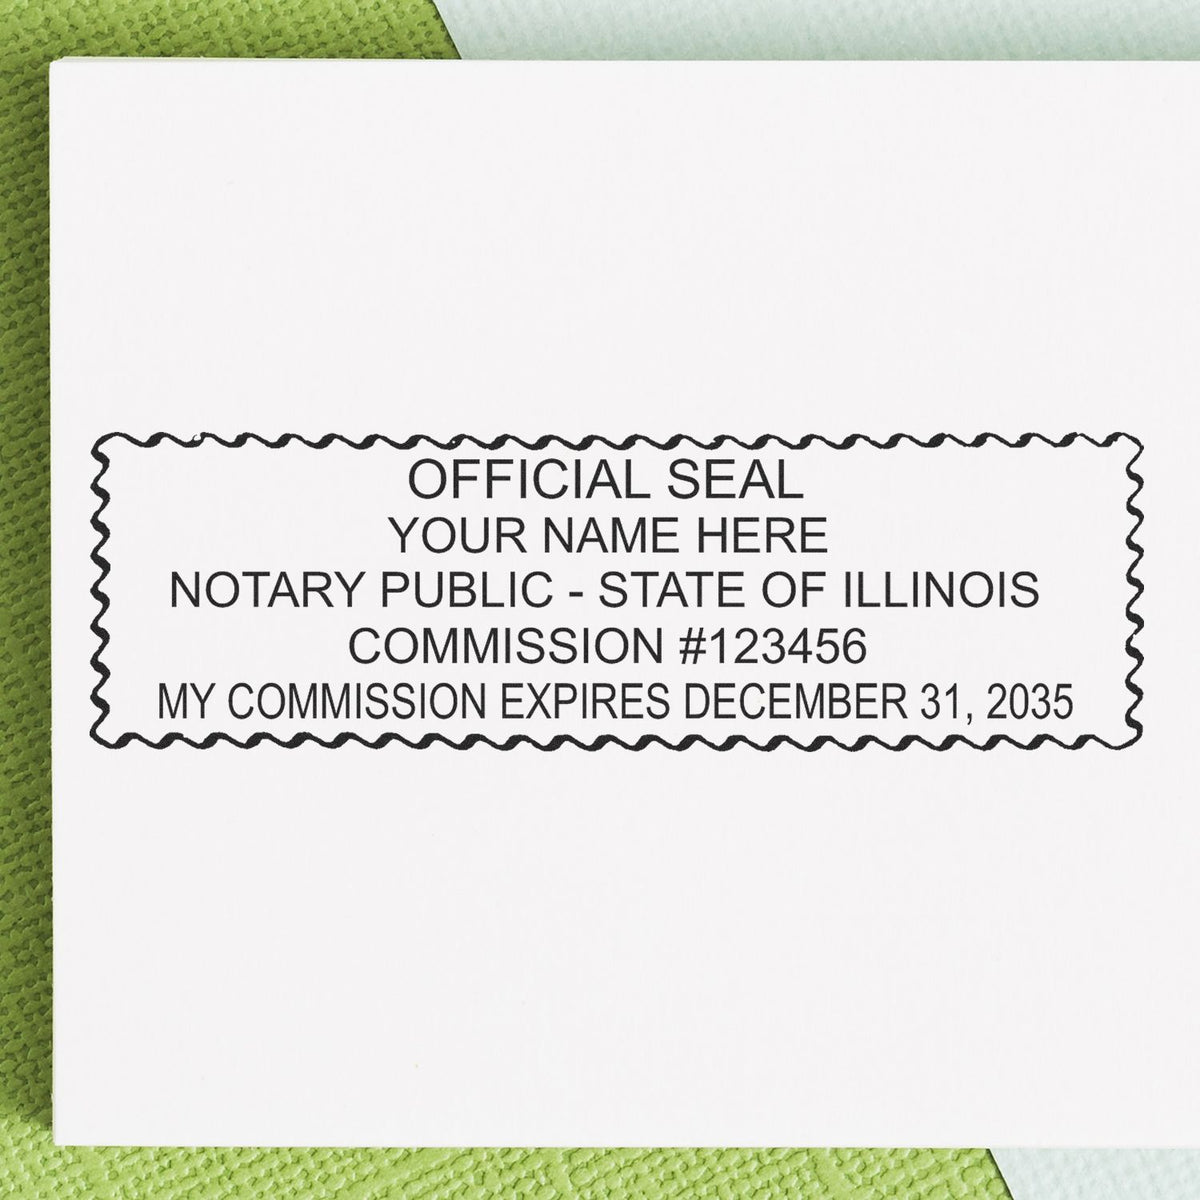 A stamped impression of the Self-Inking Rectangular Illinois Notary Stamp in this stylish lifestyle photo, setting the tone for a unique and personalized product.